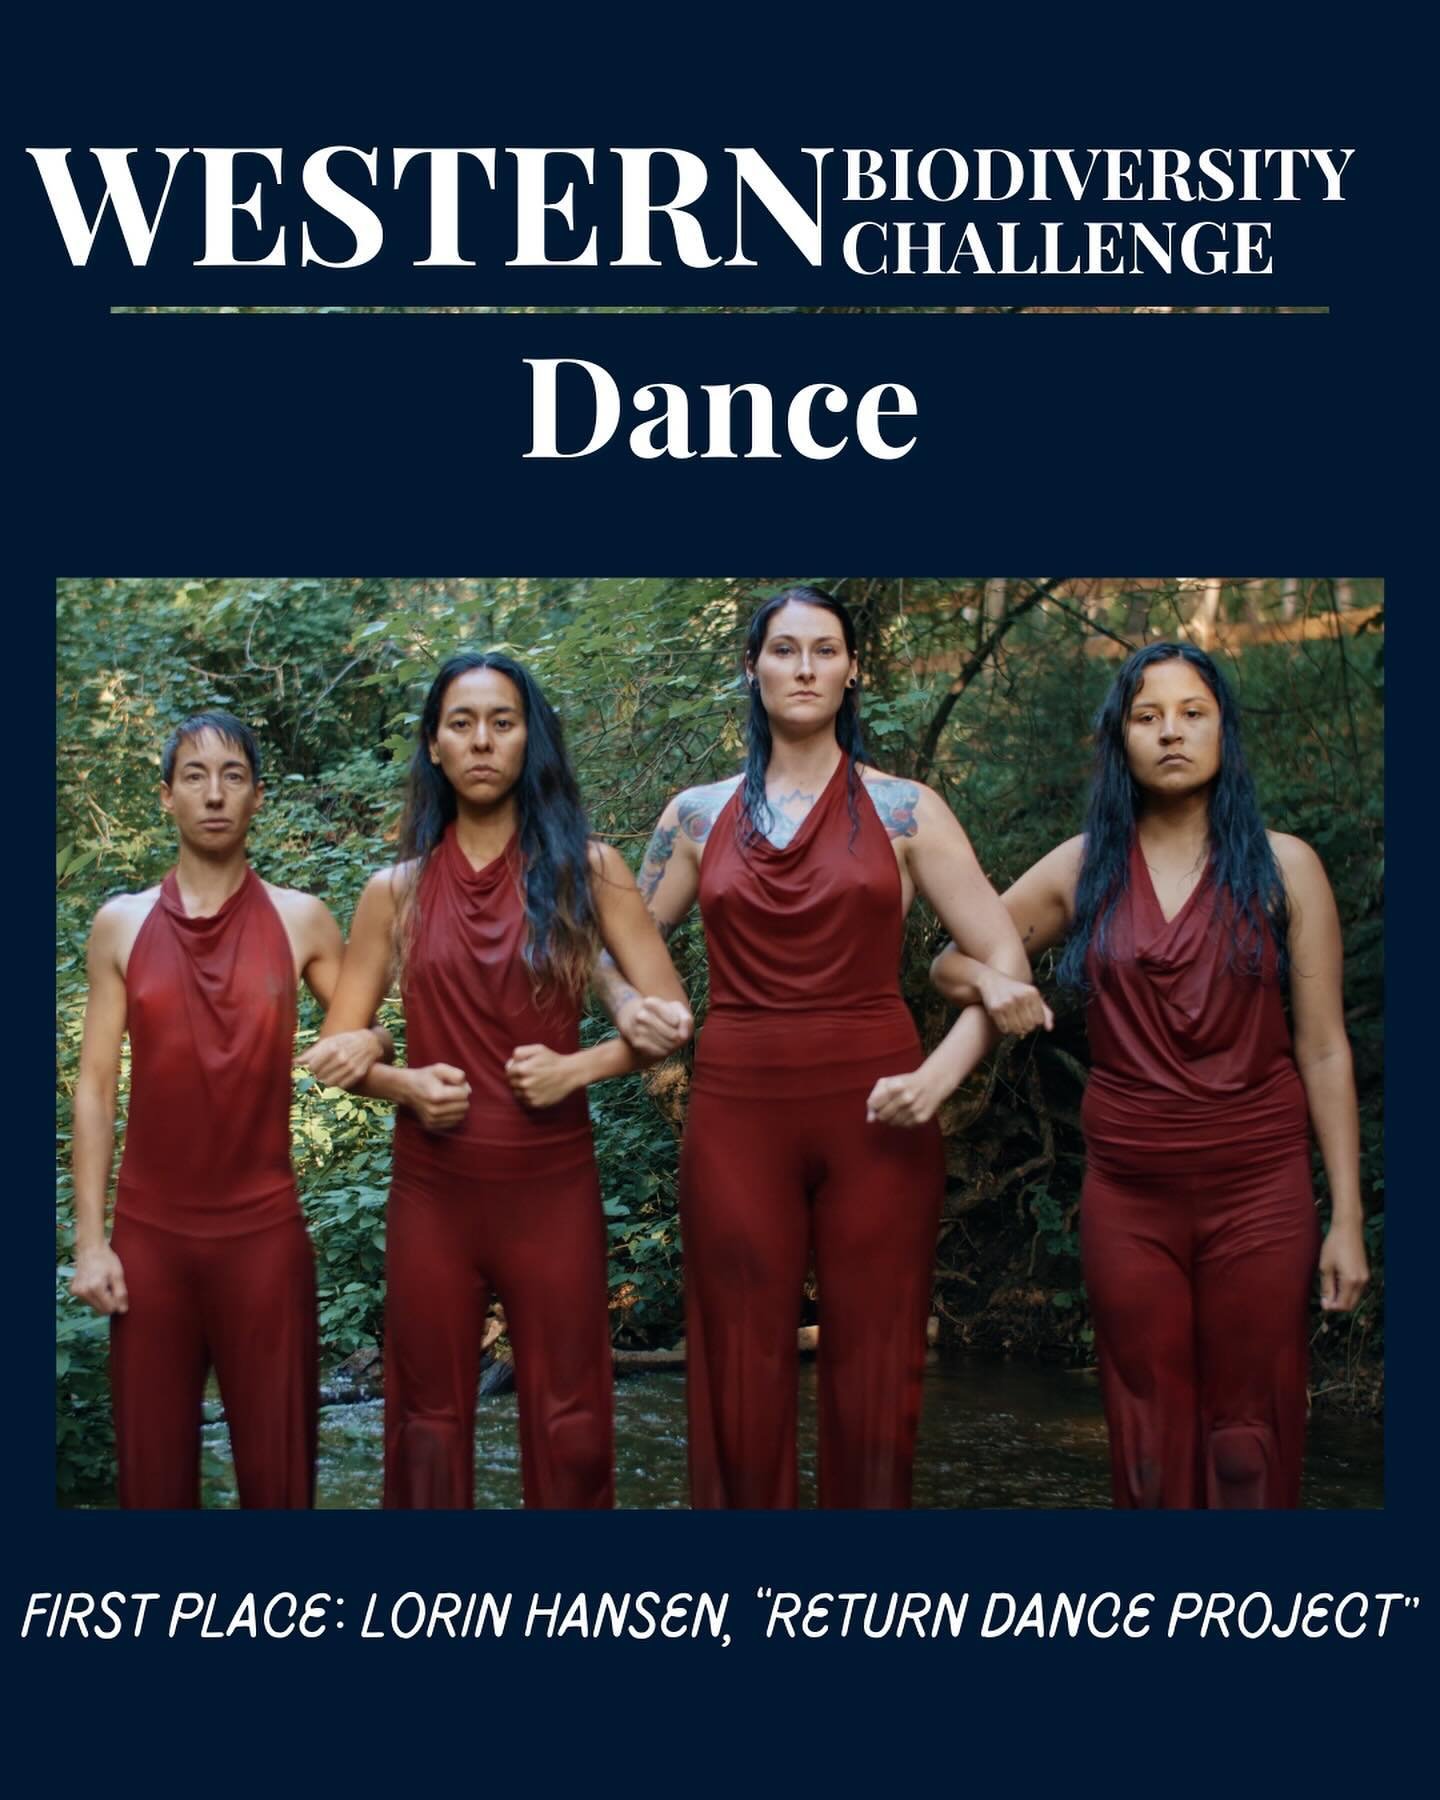 We are thrilled to share our first place submission in the Dance category of our Western Biodiversity Challenge, &ldquo;Return Dance Project&rdquo; by Lorin Hansen.

Lorin shares this about her work: &ldquo;My piece is a personal movement study captu